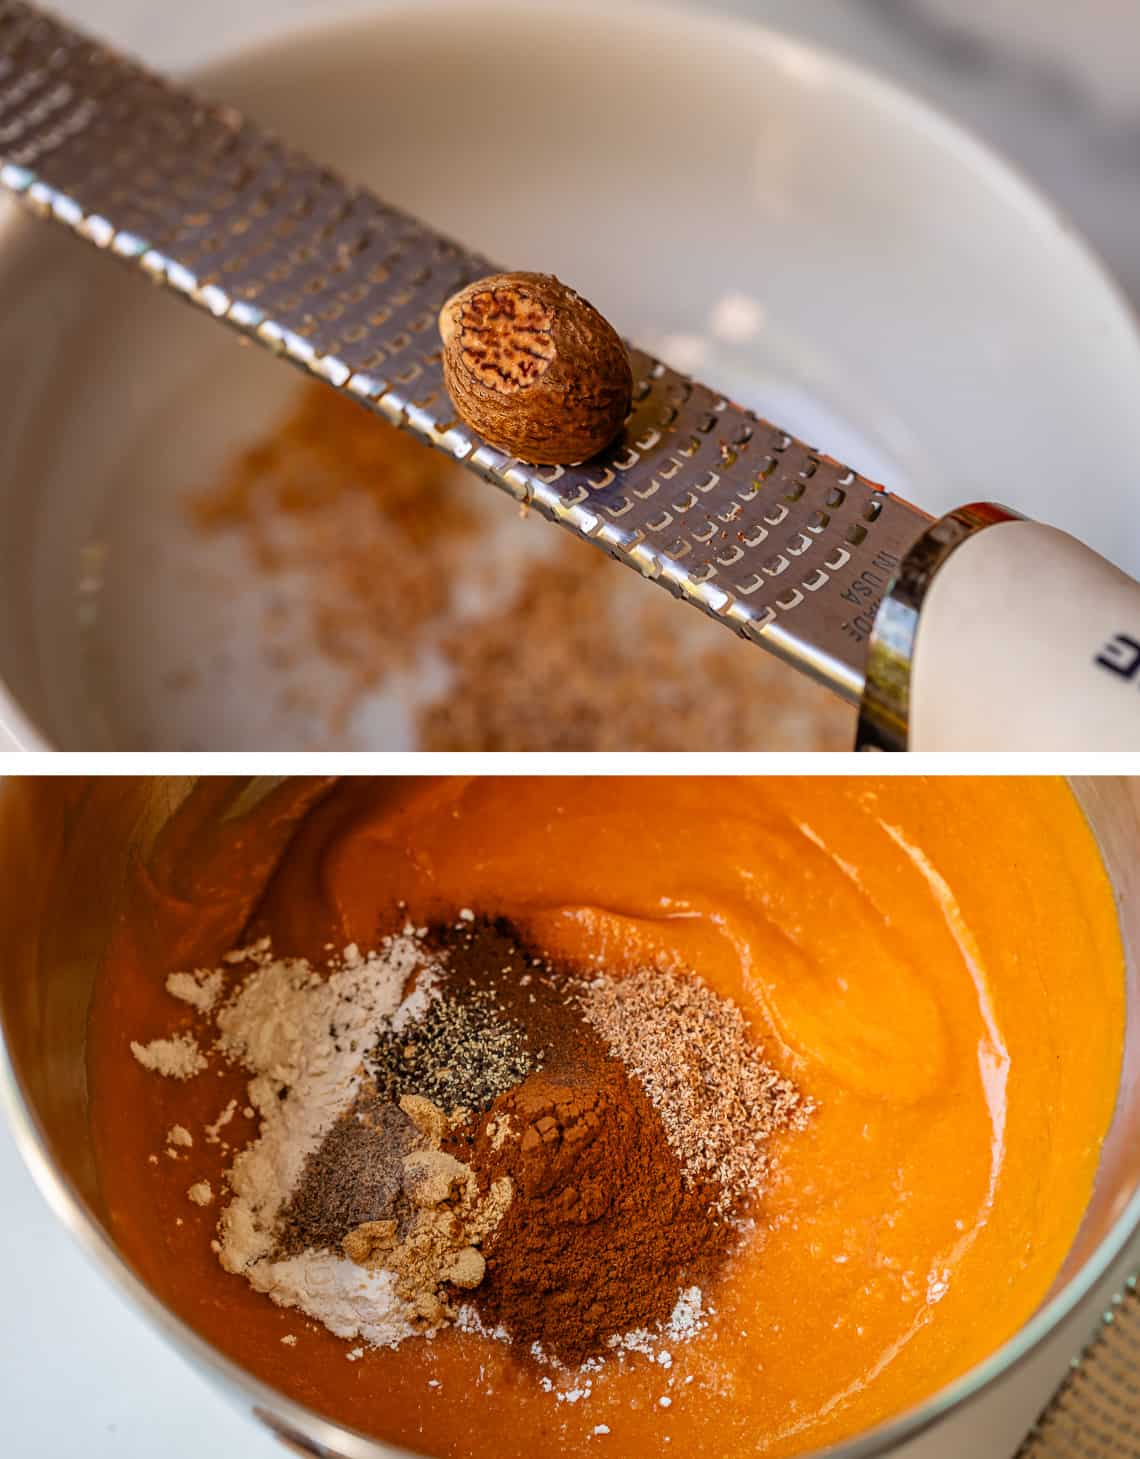 top whole nutmeg sitting on a microplane zester, bottom all the spices added to mixing bowl.